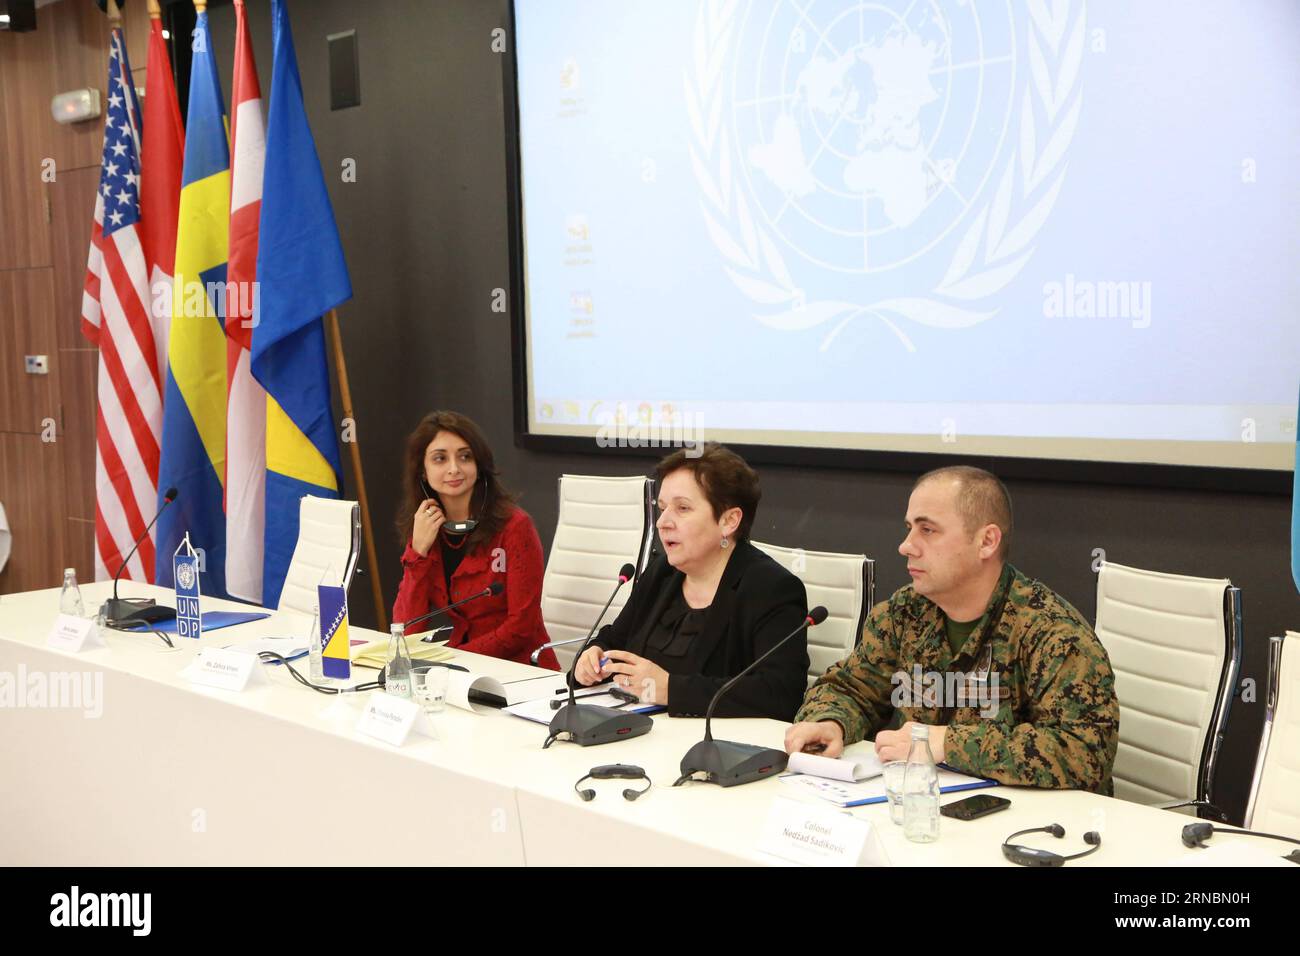 (160309) -- SARAJEVO, March 9, 2016 -- Defense Minister of Bosnia and Herzegovina (BiH) Marina Pendes (C) speaks during a session of the Strategic Committee for Weapons, Ammunition and Explosive Ordnance in Sarajevo, BiH, on March 9, 2016. ) BOSNIA AND HERZEGOVINA-SARAJEVO-DESTRUCTION OF WEAPONS HarisxMemija PUBLICATIONxNOTxINxCHN   Sarajevo March 9 2016 Defense Ministers of Bosnia and Herzegovina BIH Marina Pendes C Speaks during a Session of The Strategic Committee for Weapons Ammunition and Explosive Ordnance in Sarajevo BIH ON March 9 2016 Bosnia and Herzegovina Sarajevo Destruction of Wea Stock Photo